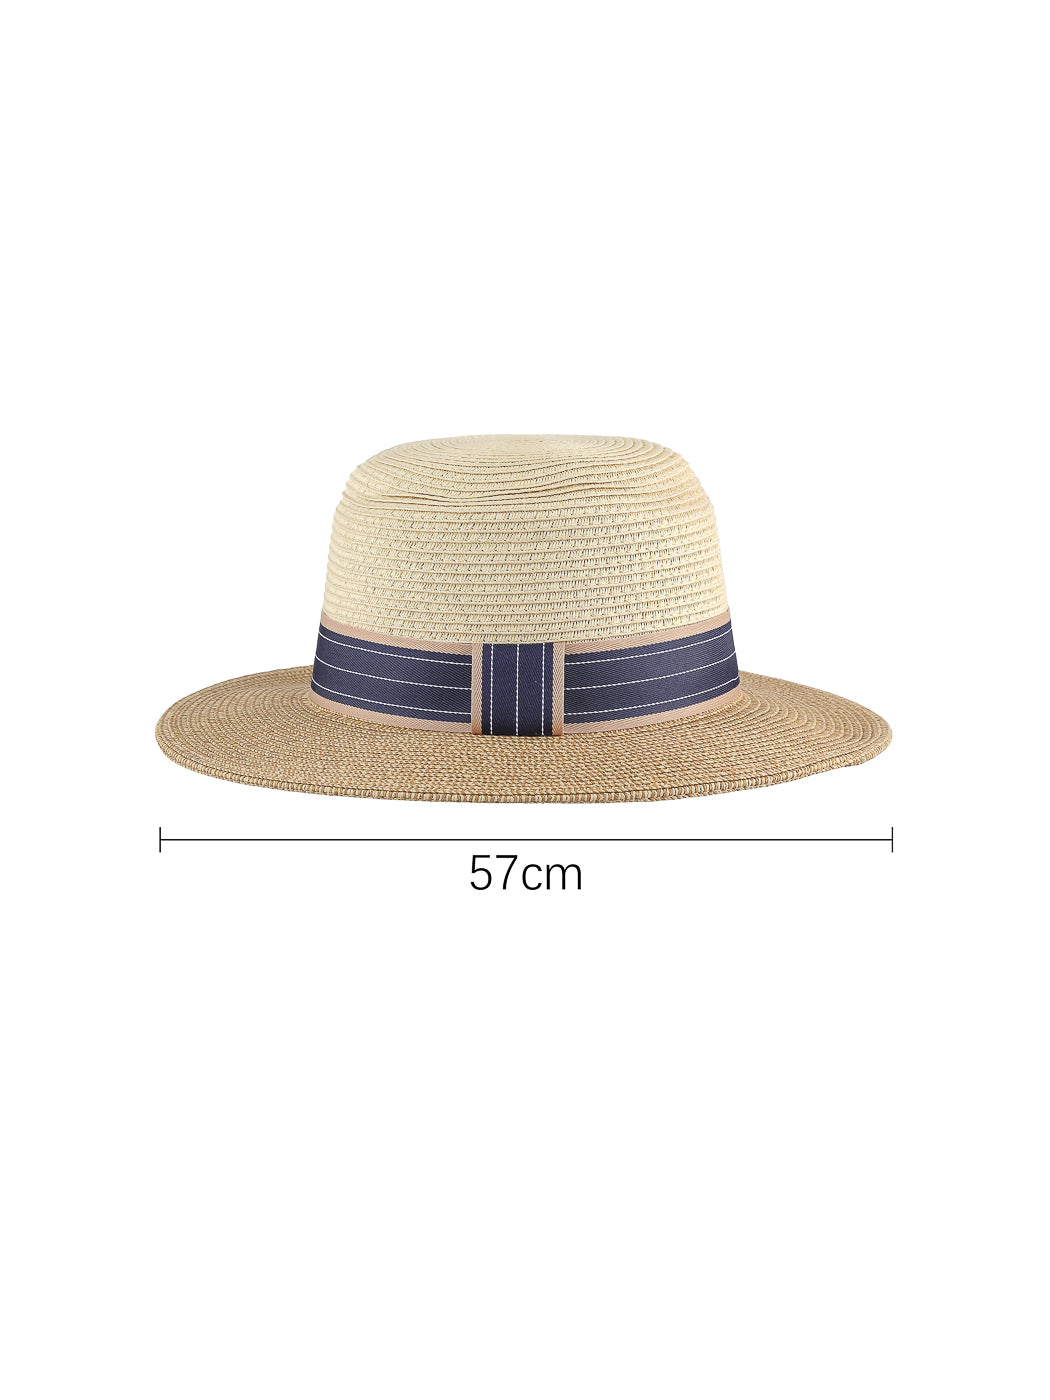 MINISO BRITISH STYLE BICOLOR STRAW HAT WITH FLAT TOP ( KHAKI ) 2010116811108 FASHIONABLE HAT-2